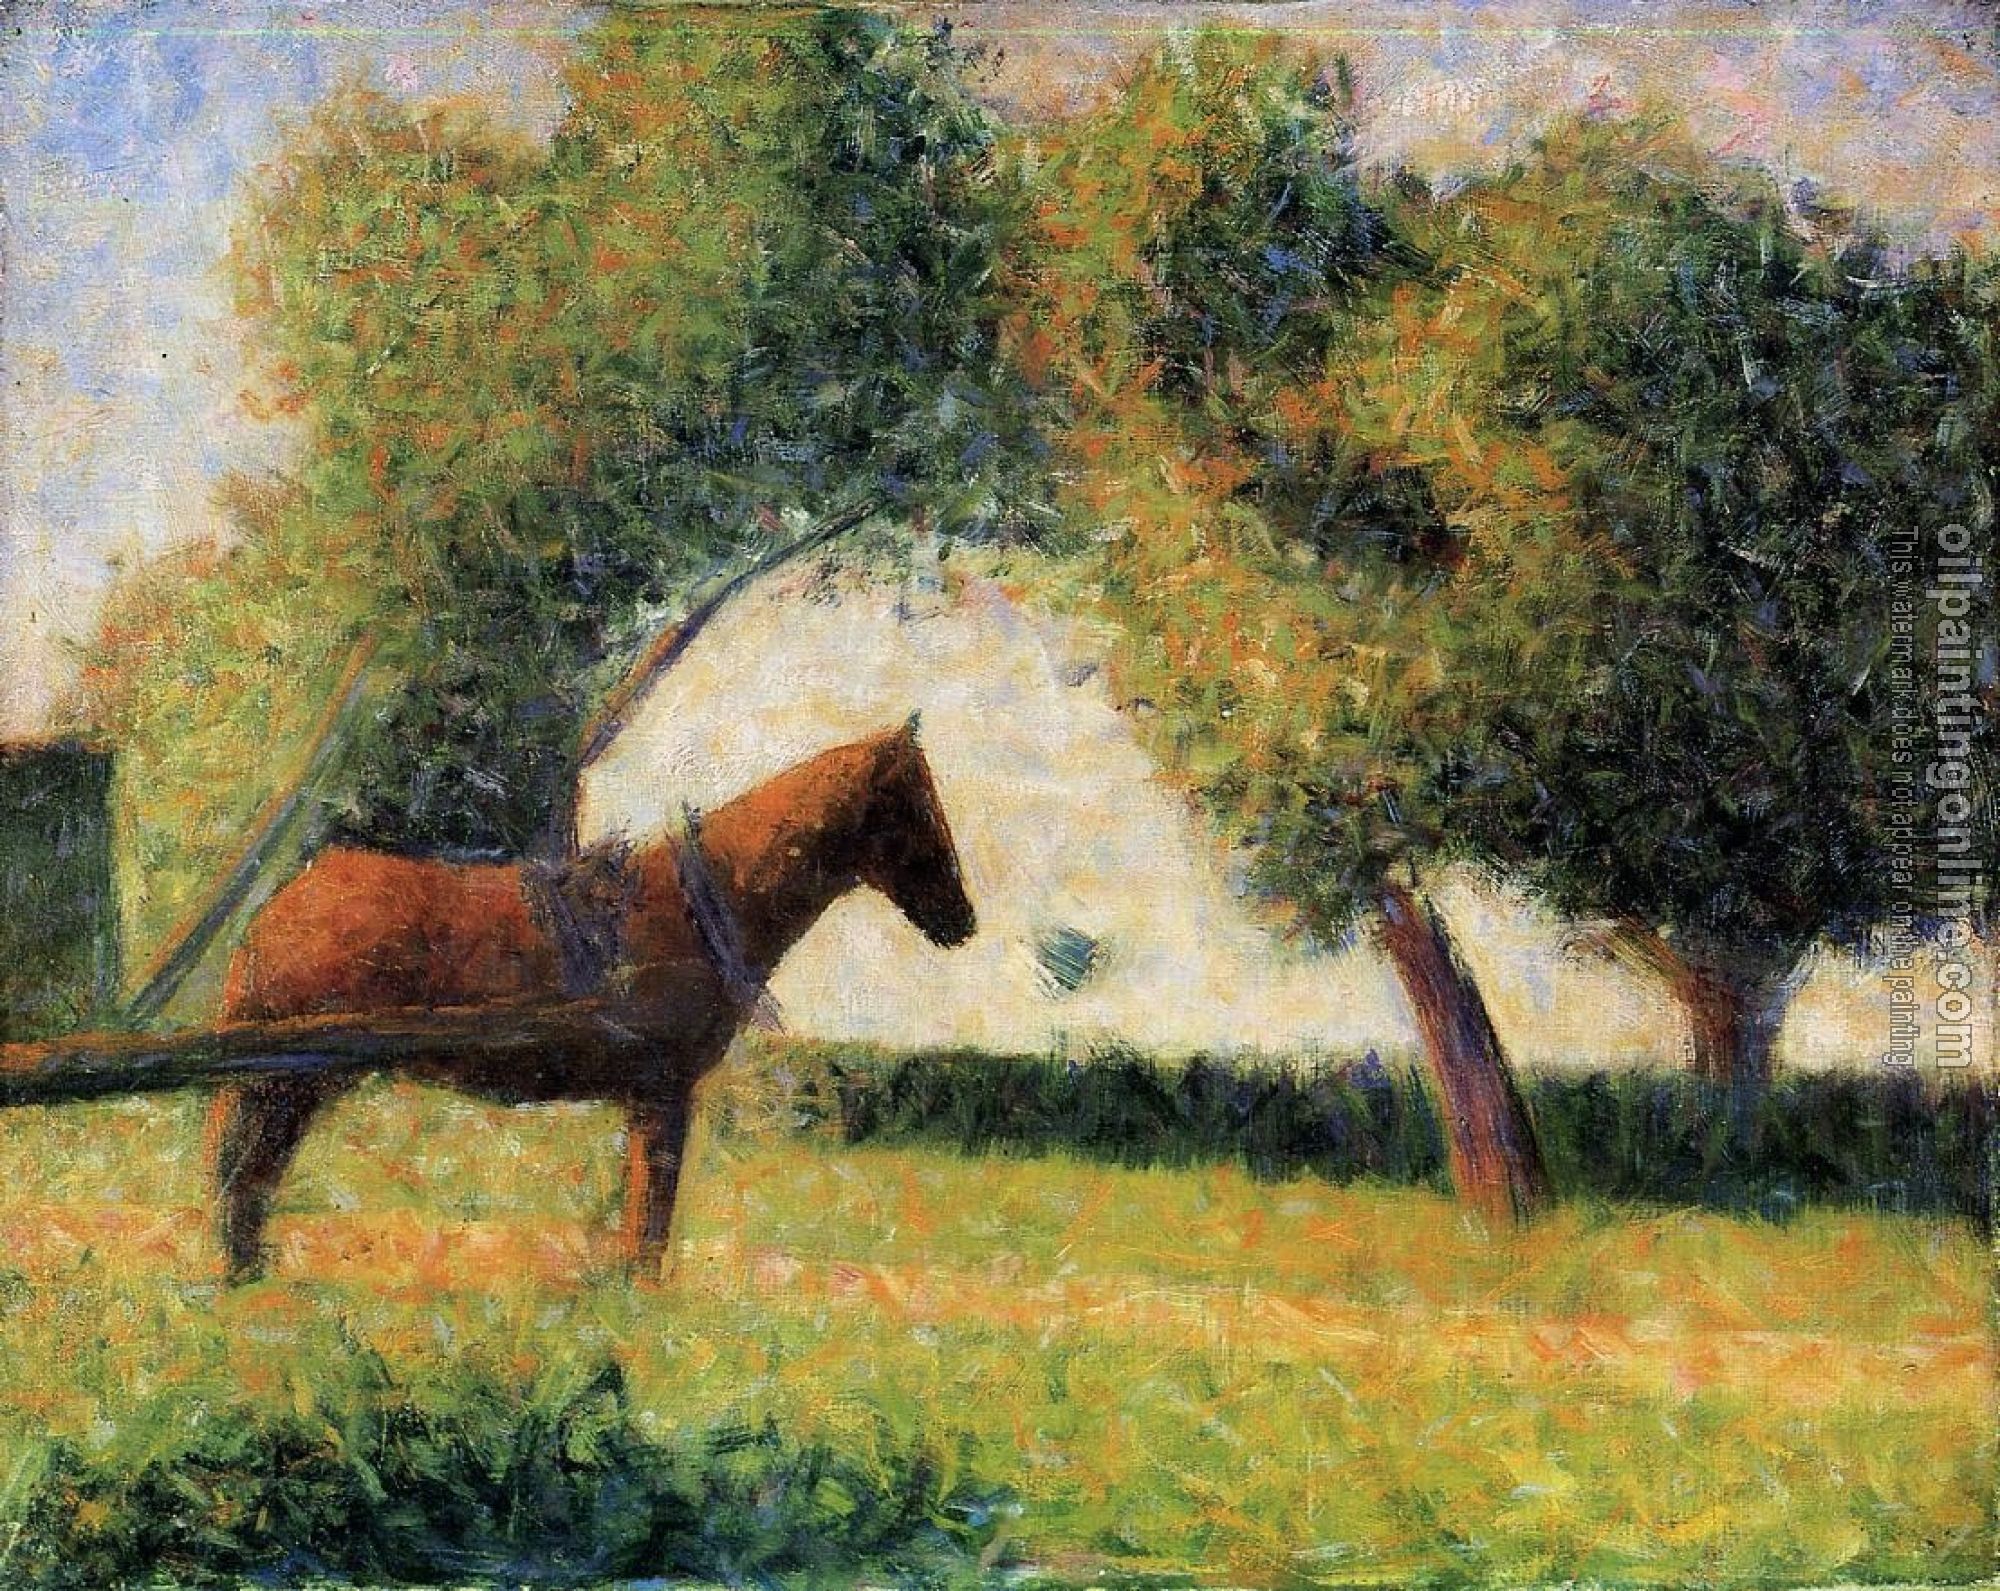 Seurat, Georges - Horse and Cart